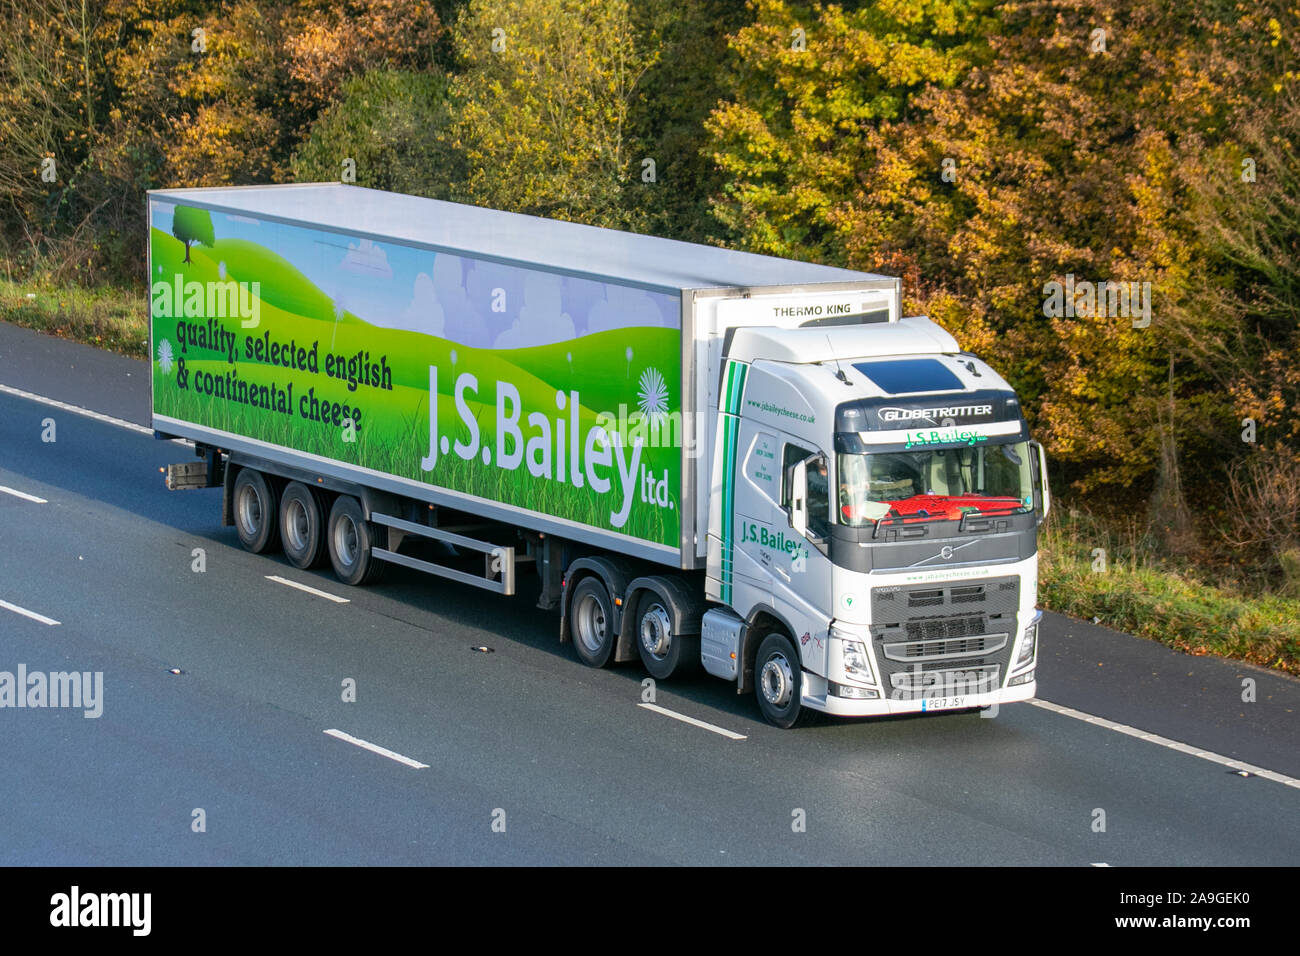 J.S.BAILEY Ltd English & Continental cheese; Haulage delivery trucks, lorry, transportation, truck, cargo, Volvo vehicle, delivery, commercial transport, industry, on the M61 at Chorley, UK Stock Photo